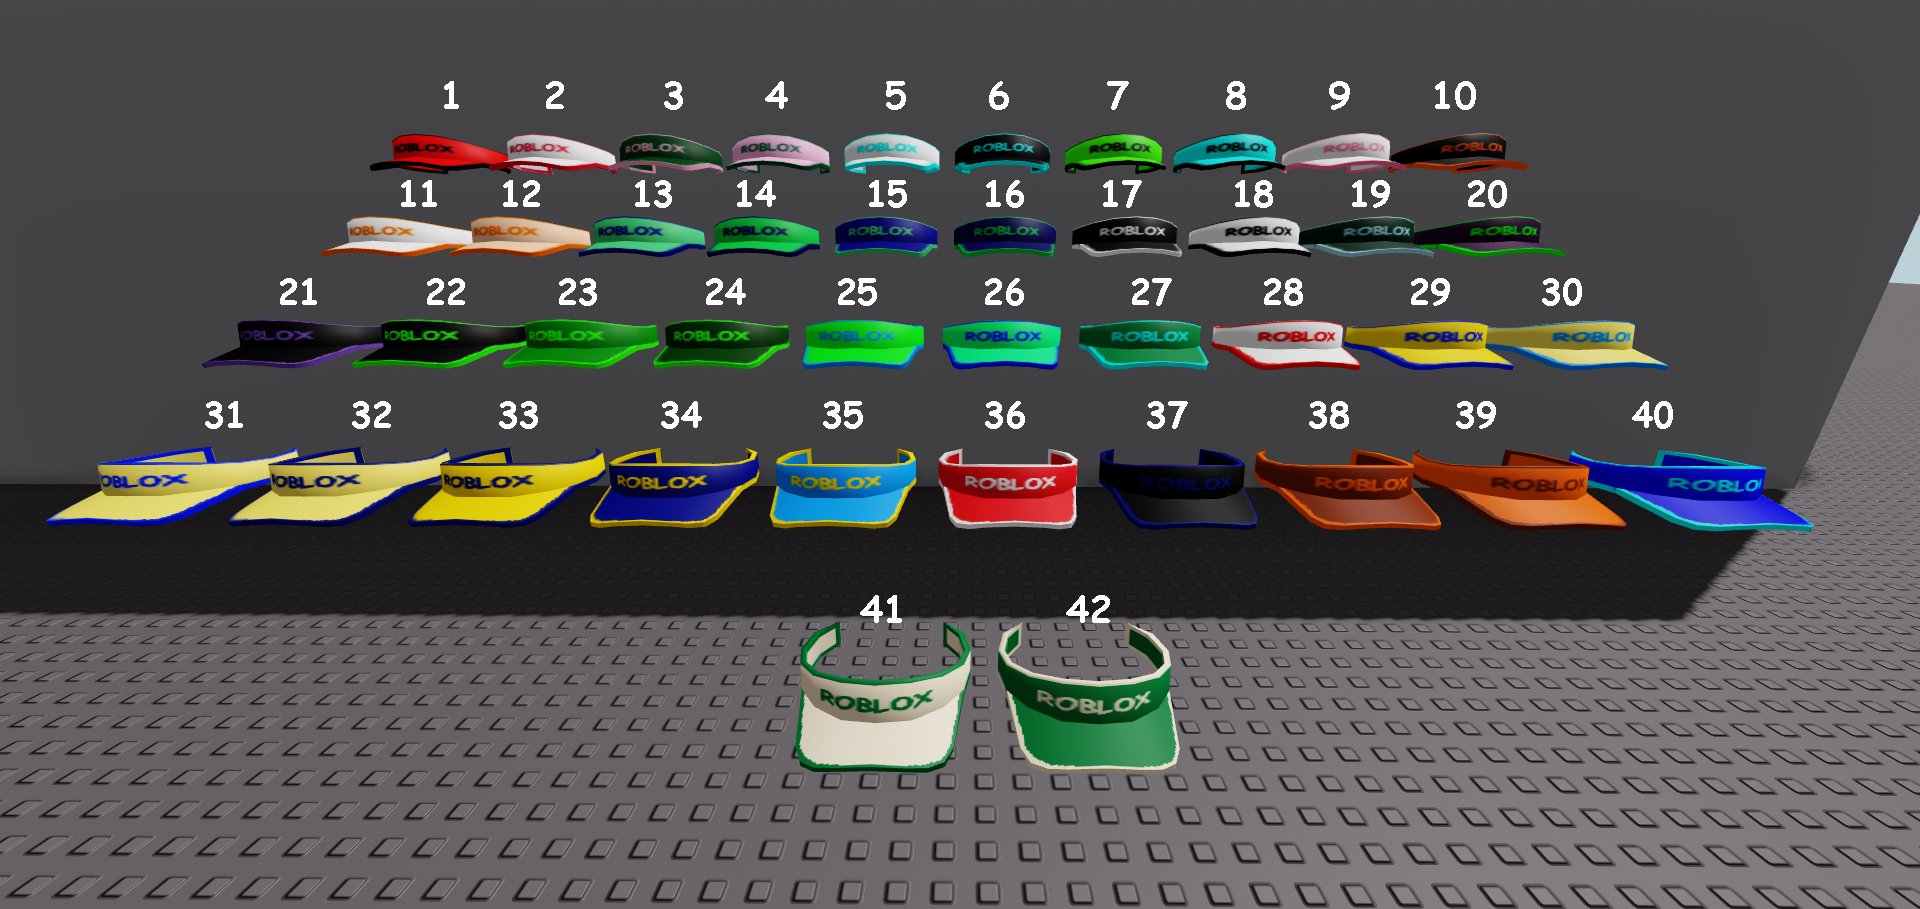 Plantchampion On Twitter Roblox Still Hasn T Made A 2020 Roblox Visor So I Made Some Textures For A Possible Roblox Visor Most Of These Color Schemes Were Requested By The Plantstudiosrbx Community - roblox visor texture roblox